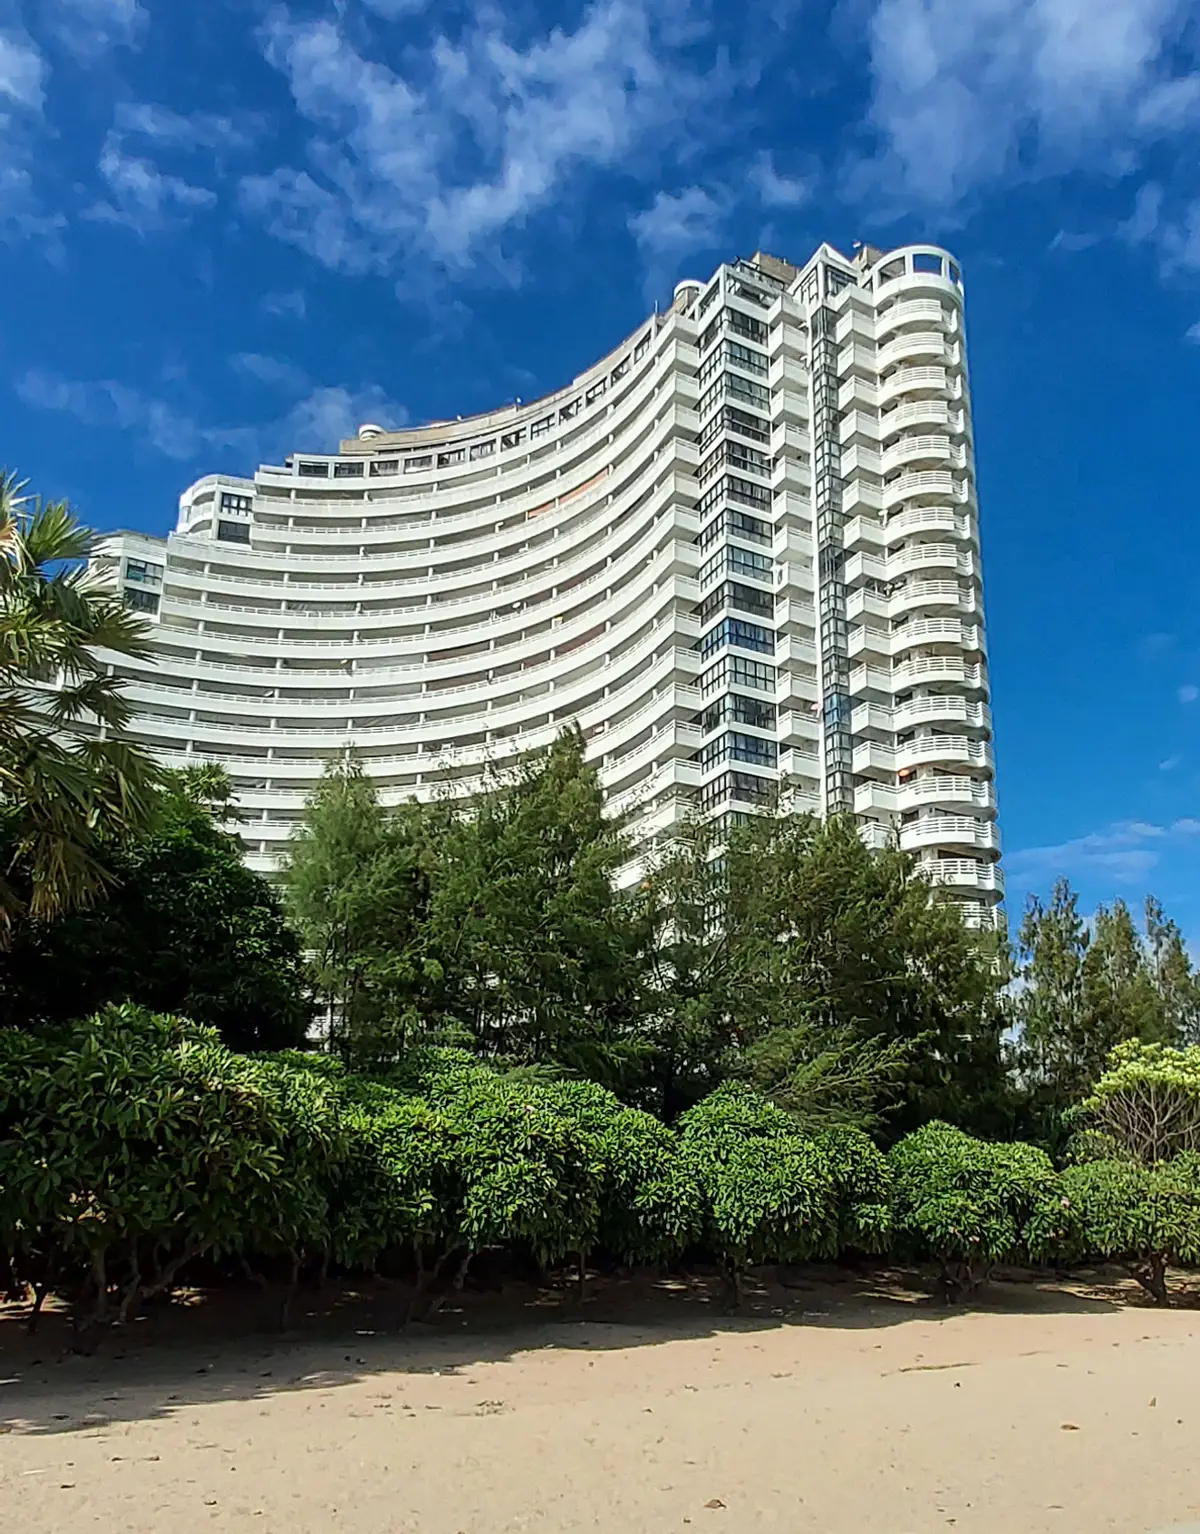 Condo with outstanding beach view and large pool area in Phayoon Garden Cliff, Ban Chang - Condominium - Baan Chang - Payoon Garden Cliff